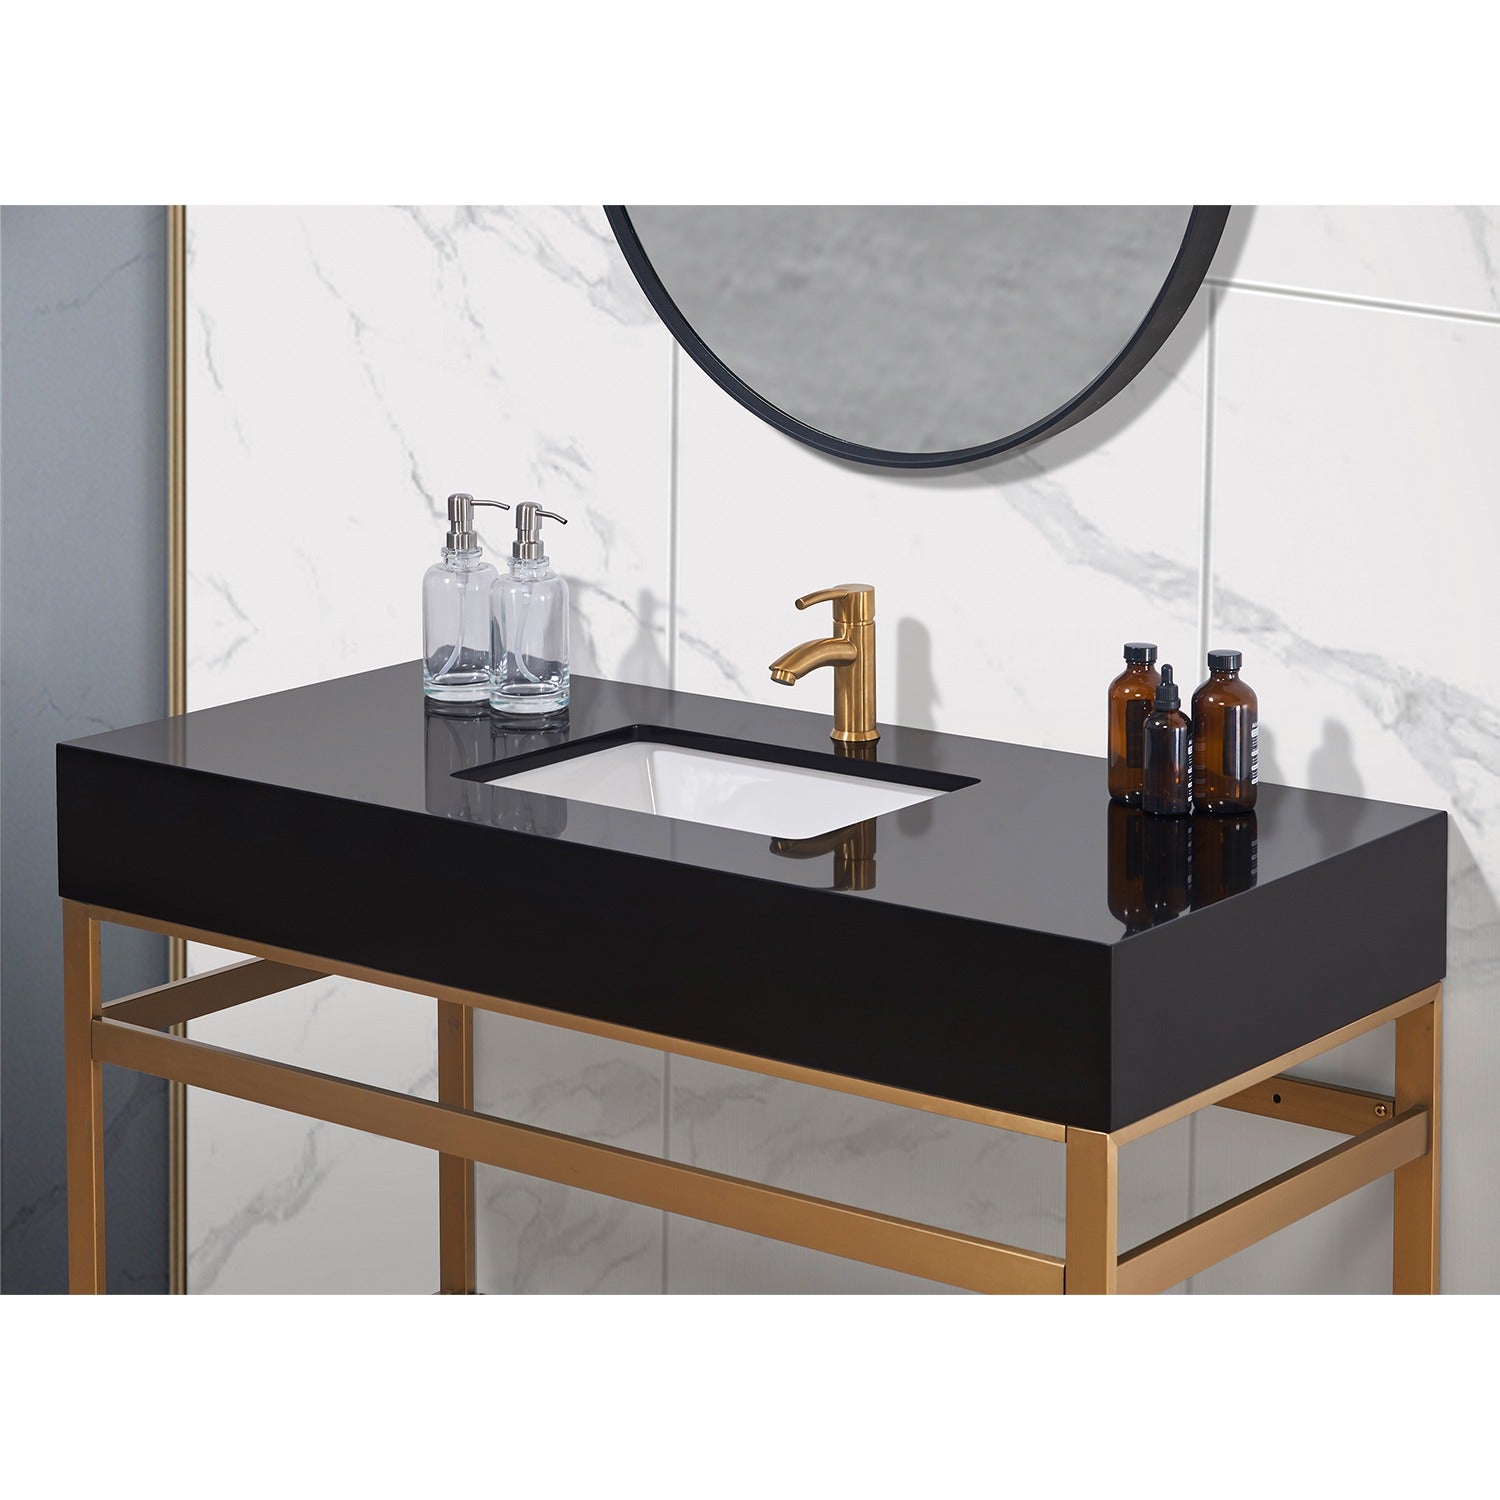 Nauders Stone effects Single Sink Vanity Top in Imperial Black Apron with White Sink